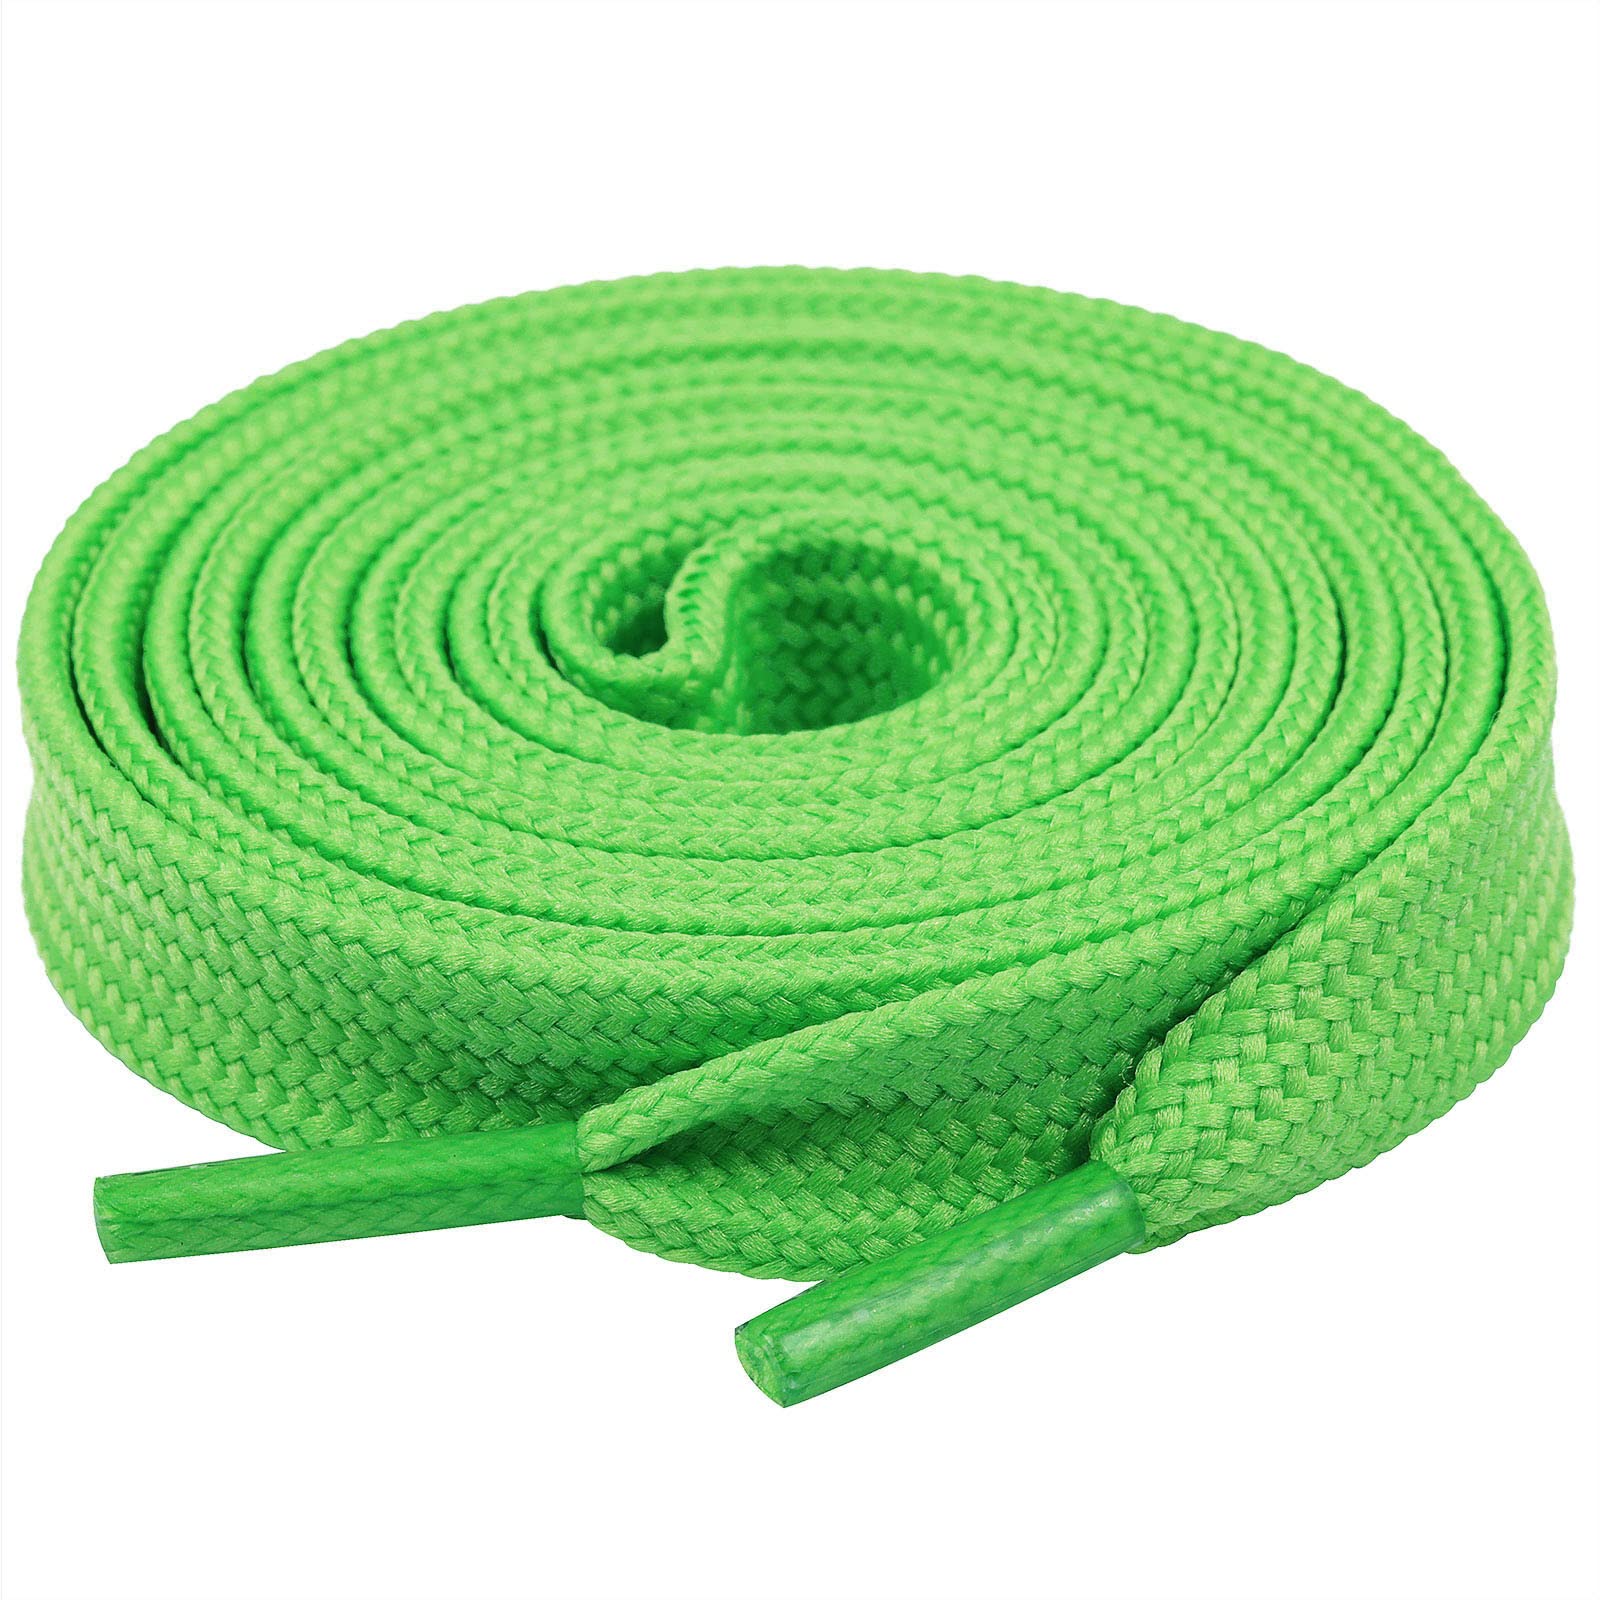 Olukssck 1 Pair Flat Shoe Laces for Sneakers, 25 Wide Athletic Shoelaces green 36 inch(91cm)